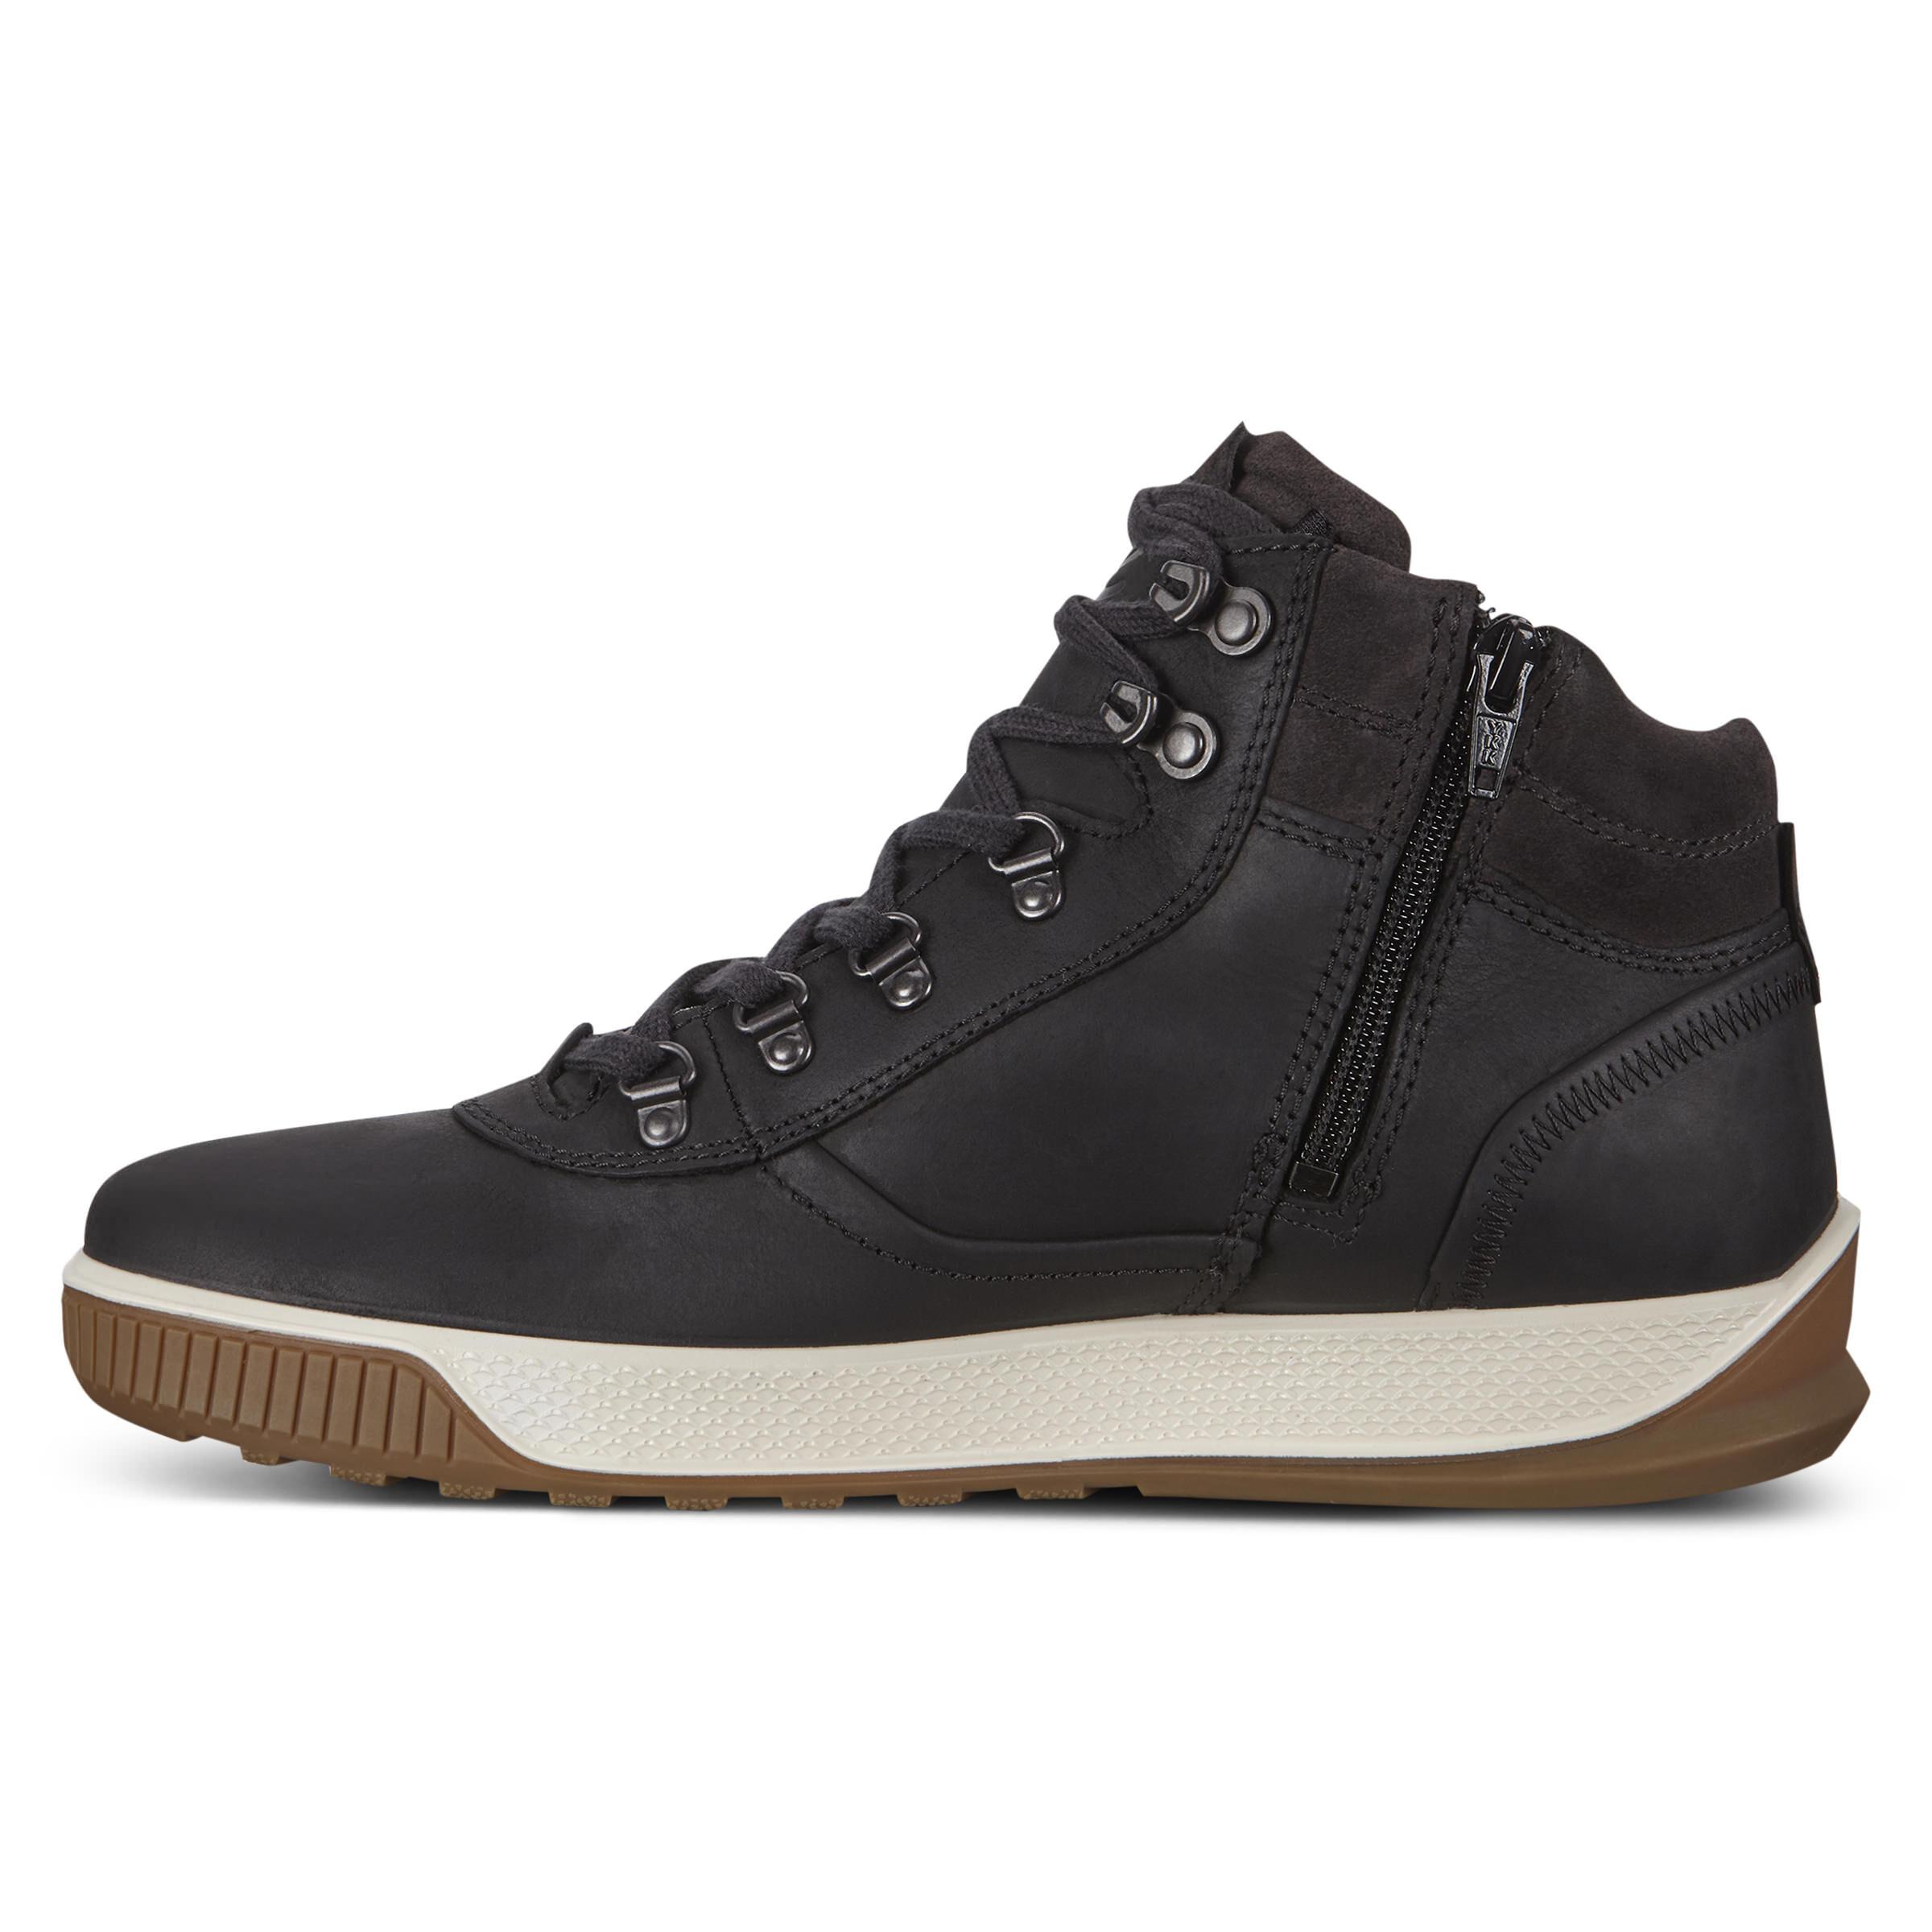 Ecco Byway Tred Ankle Boot Size in Black for Men - Lyst